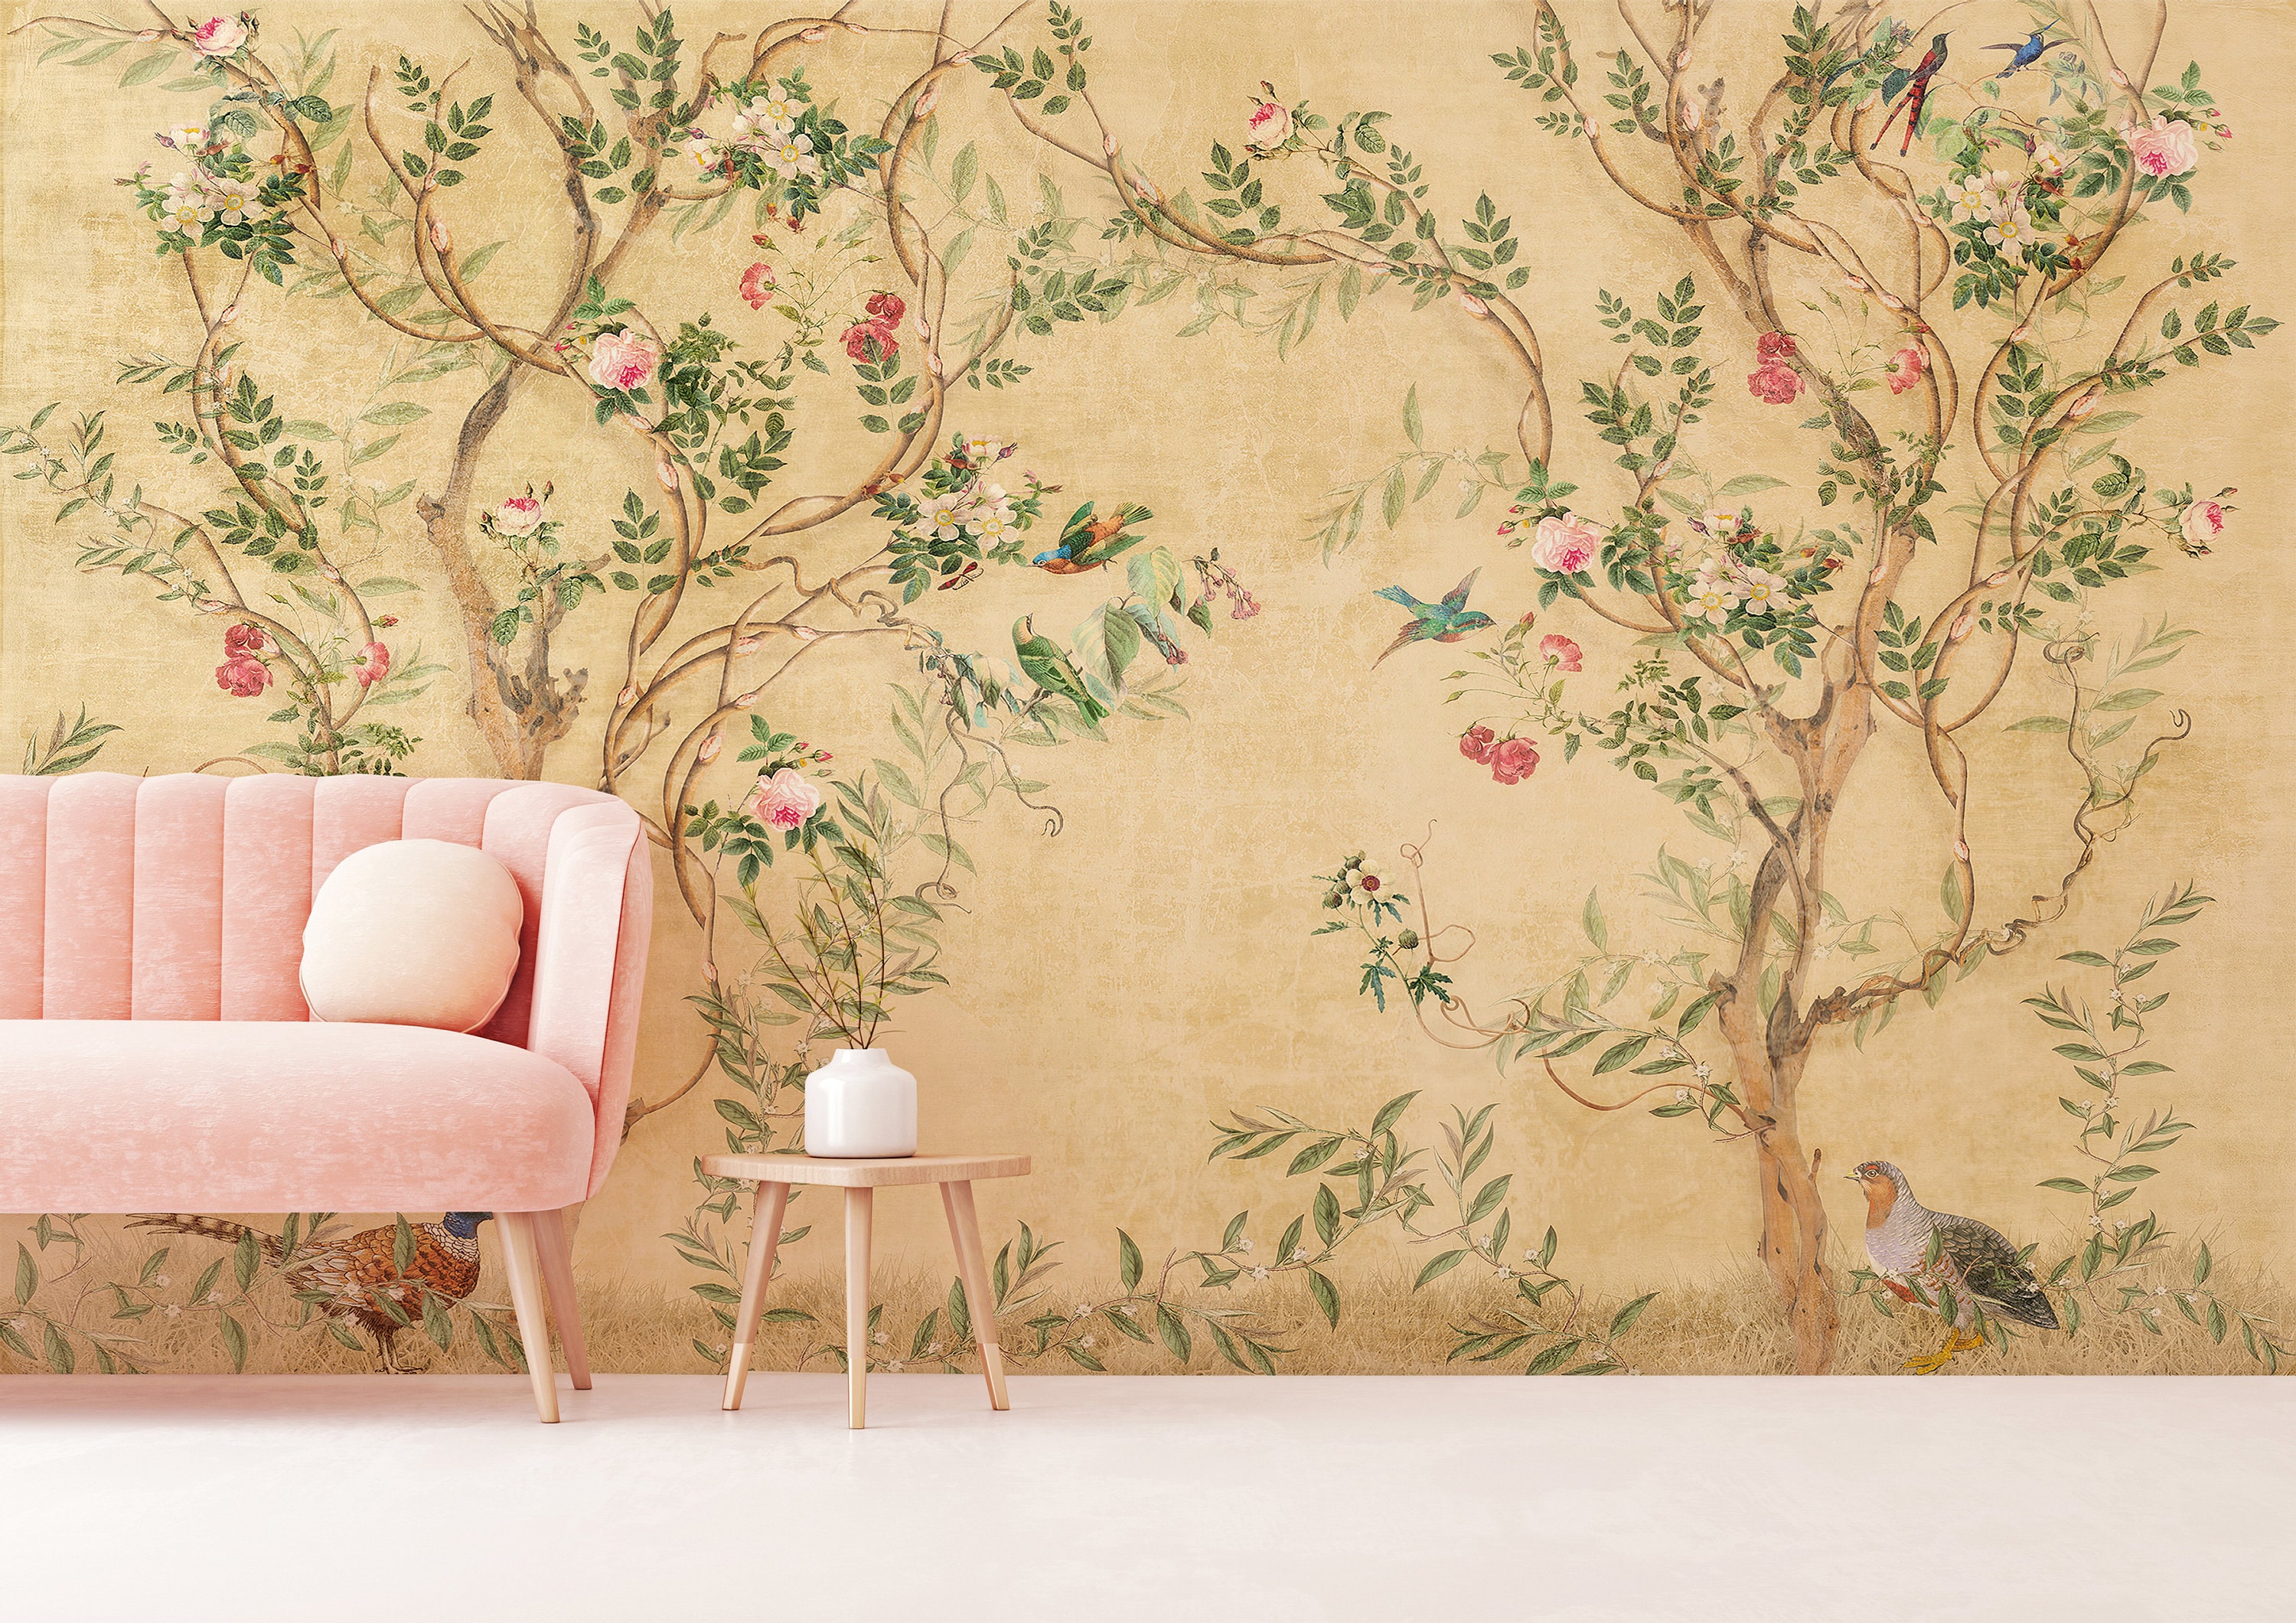 5 Beautiful Chinoiserie Wallpaper Murals to Make Your Room Stunning  ET  Speaks From Home